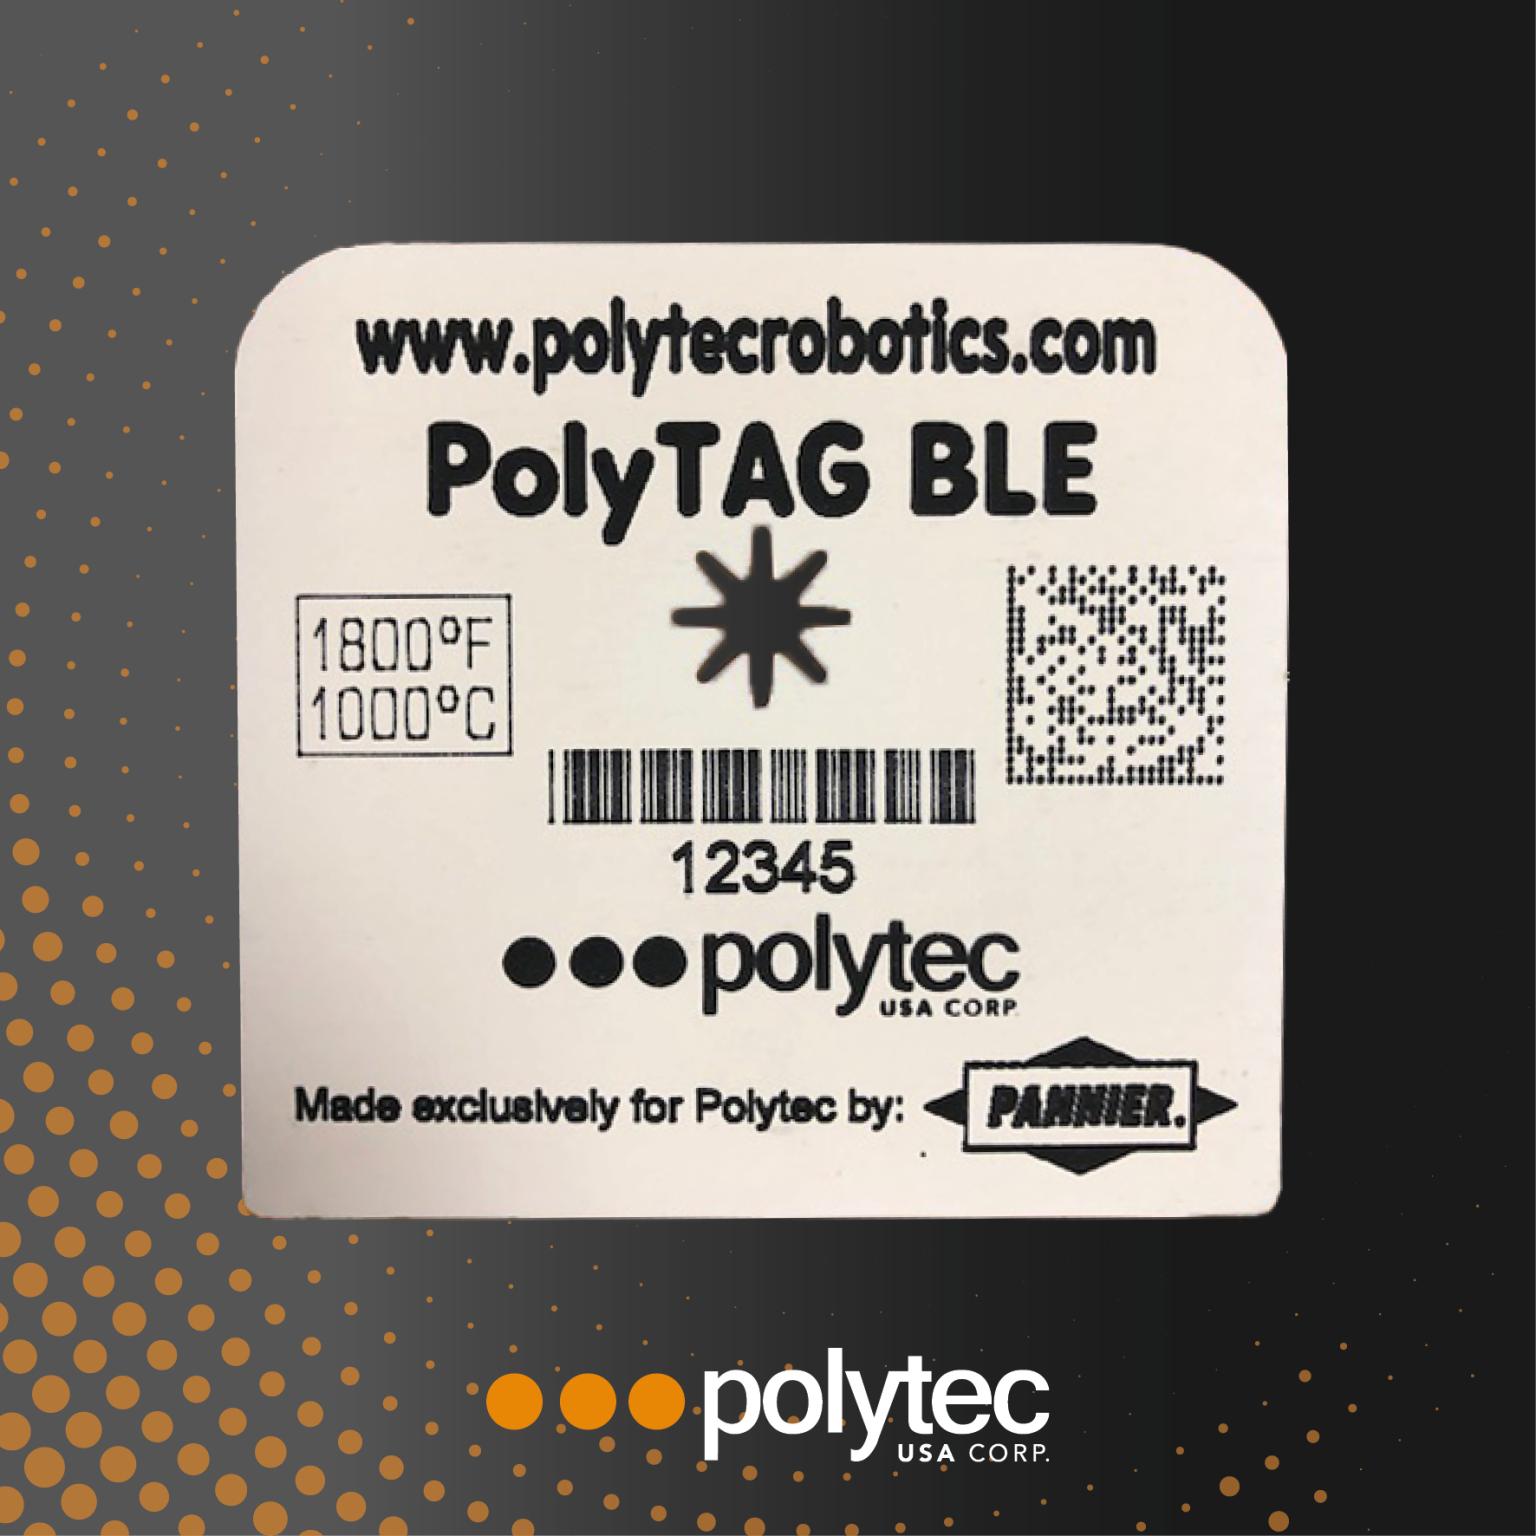 PolyTAG BLE - High temperature steel billet tracking tags.